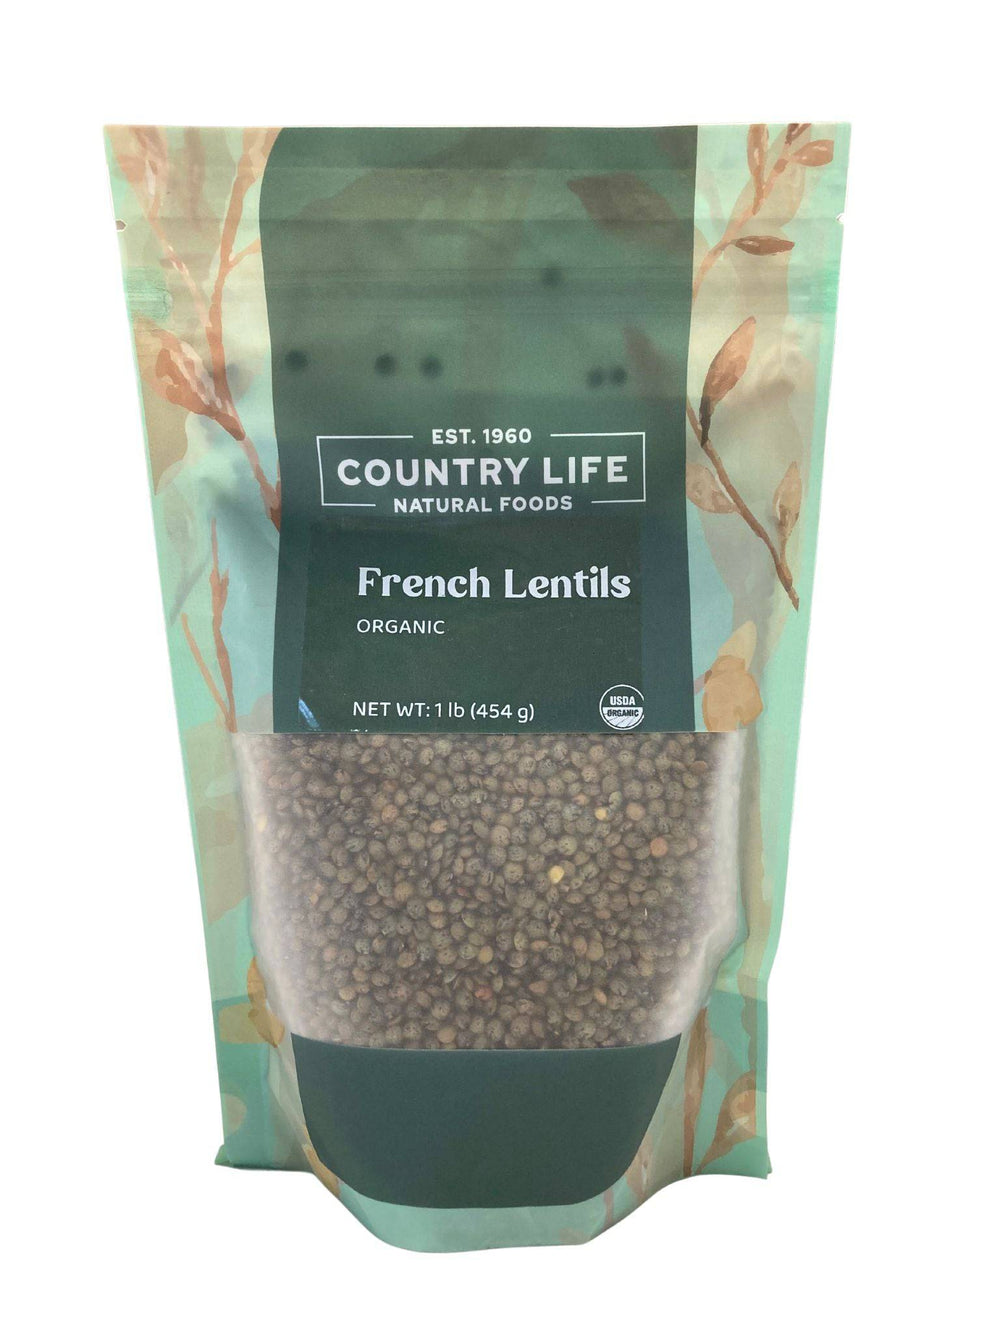 Organic Lentils, French - Country Life Natural Foods